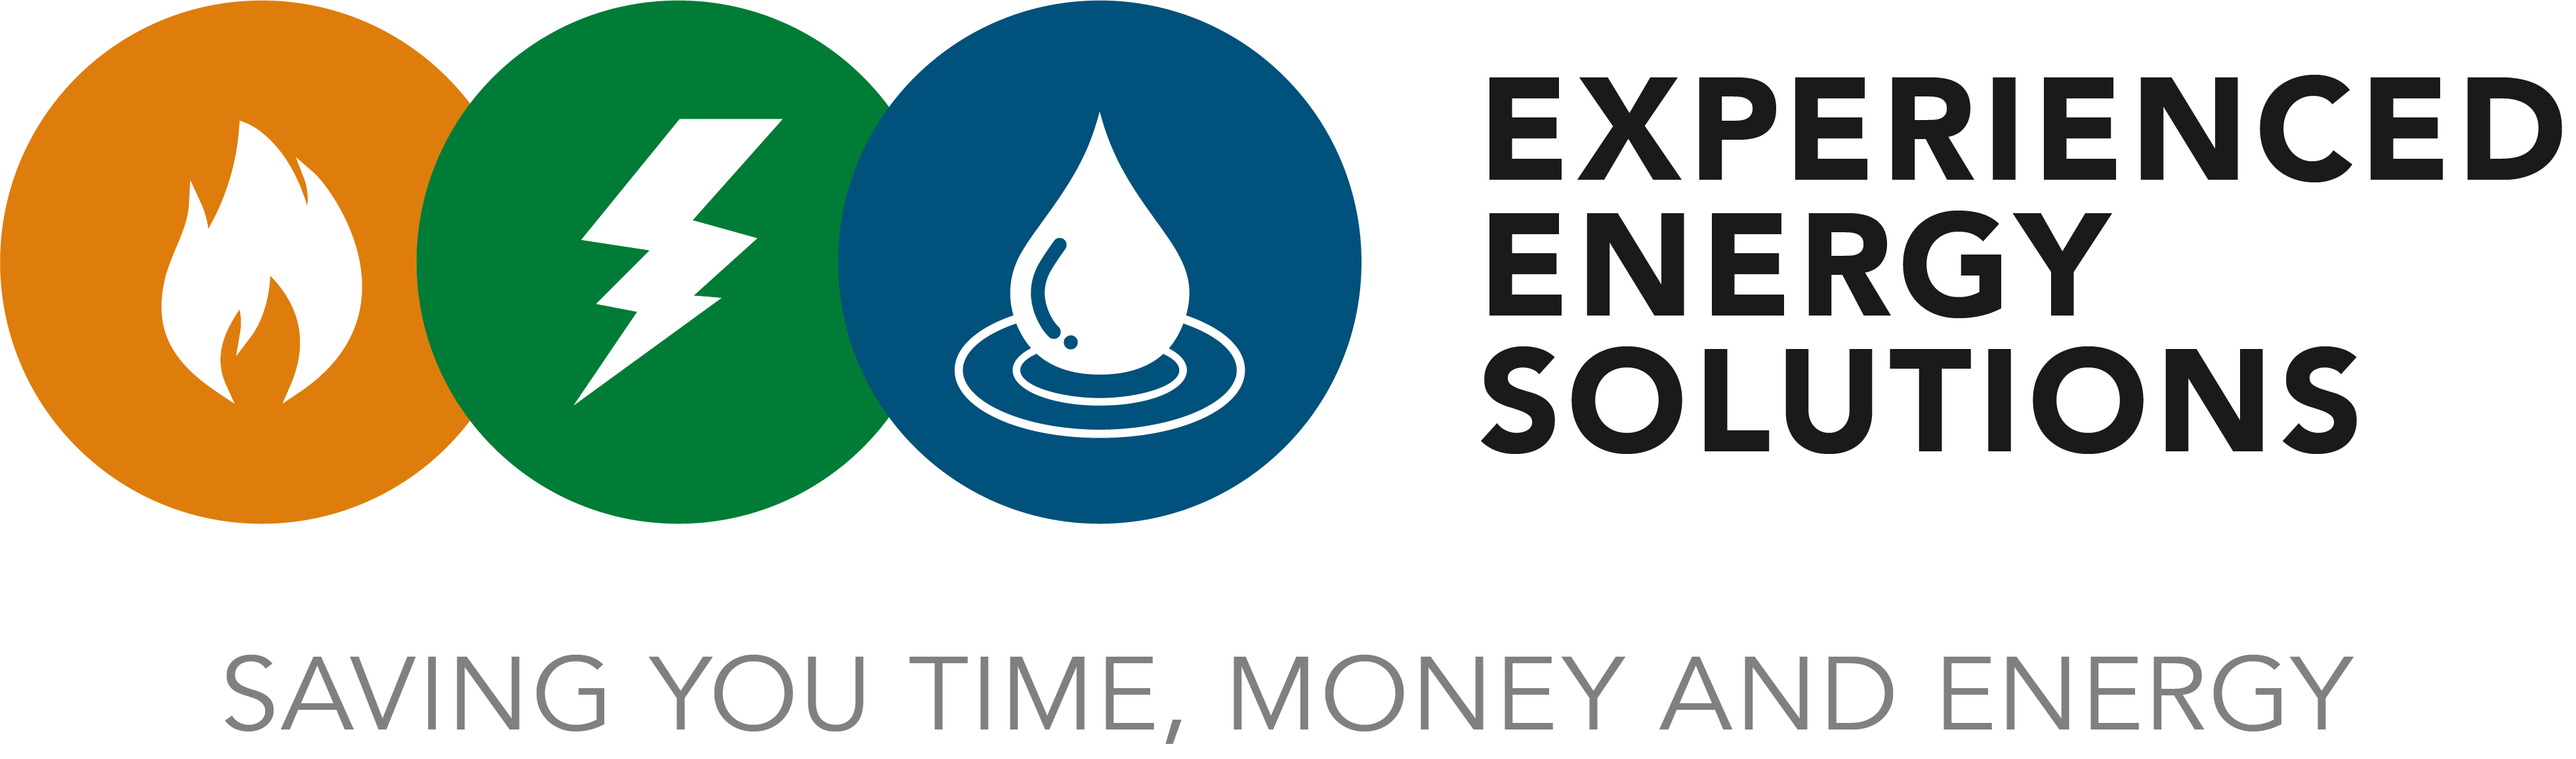 Experienced Energy Solutions Limited Icon